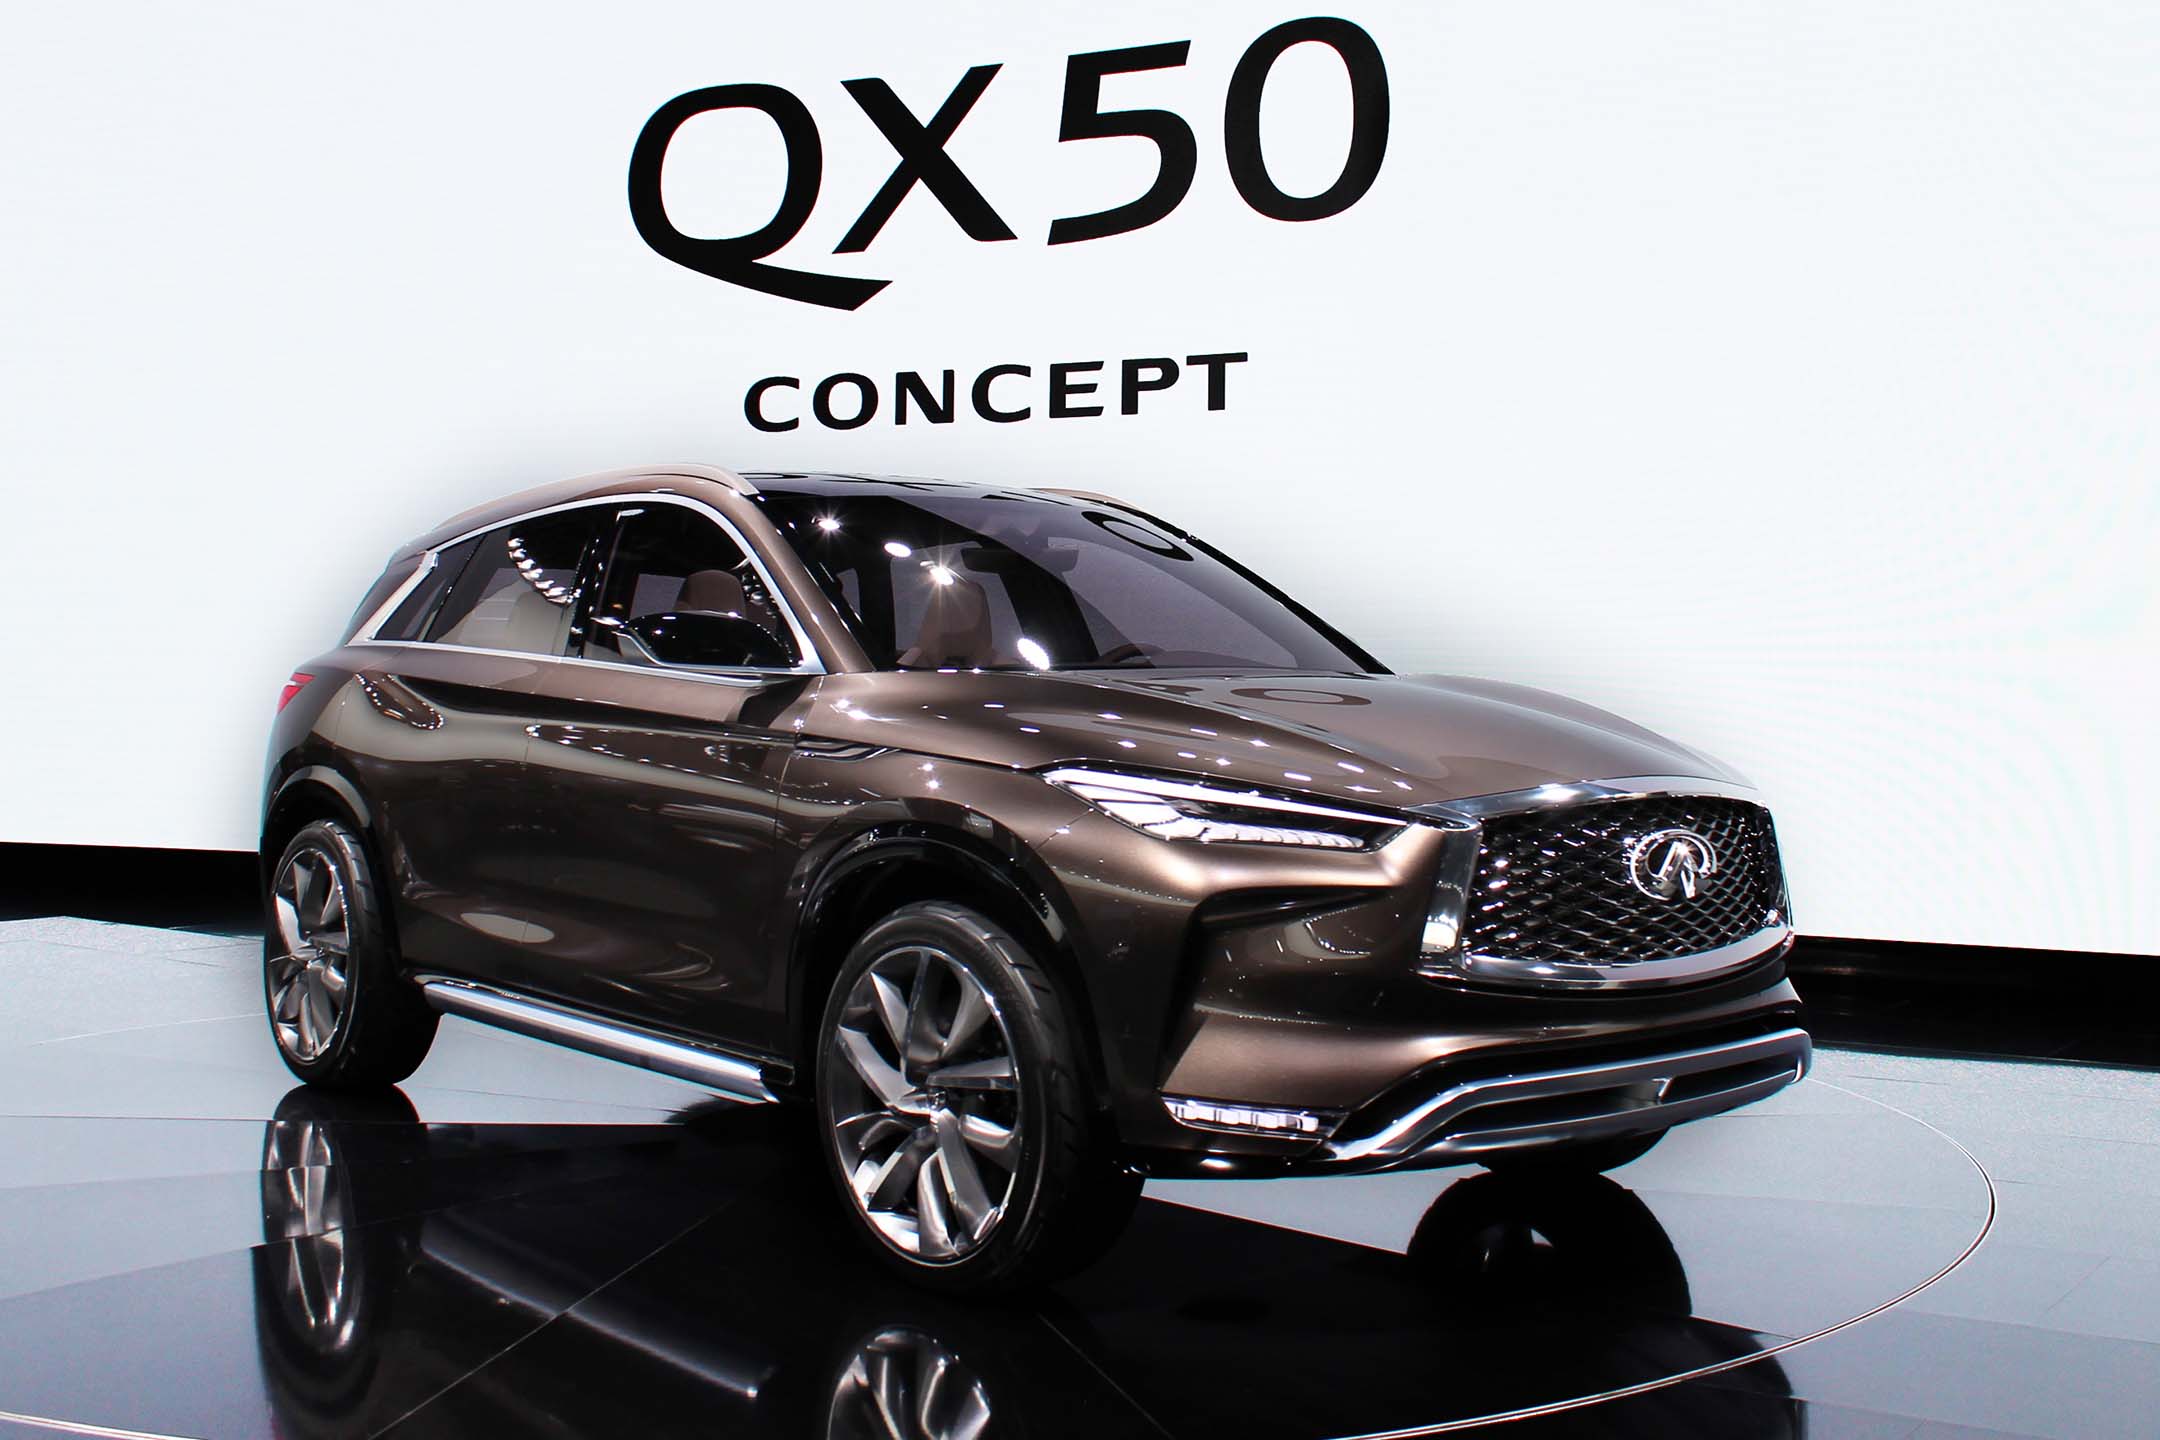 SW: Returning models shown in Detroit this year largely featured minor to moderate tweaks, but Infiniti tore up the blueprints that had gone largely unchanged since the EX days and gave the QX50 the true overhaul it needed to slot perfectly into the Infiniti CUV line-up.